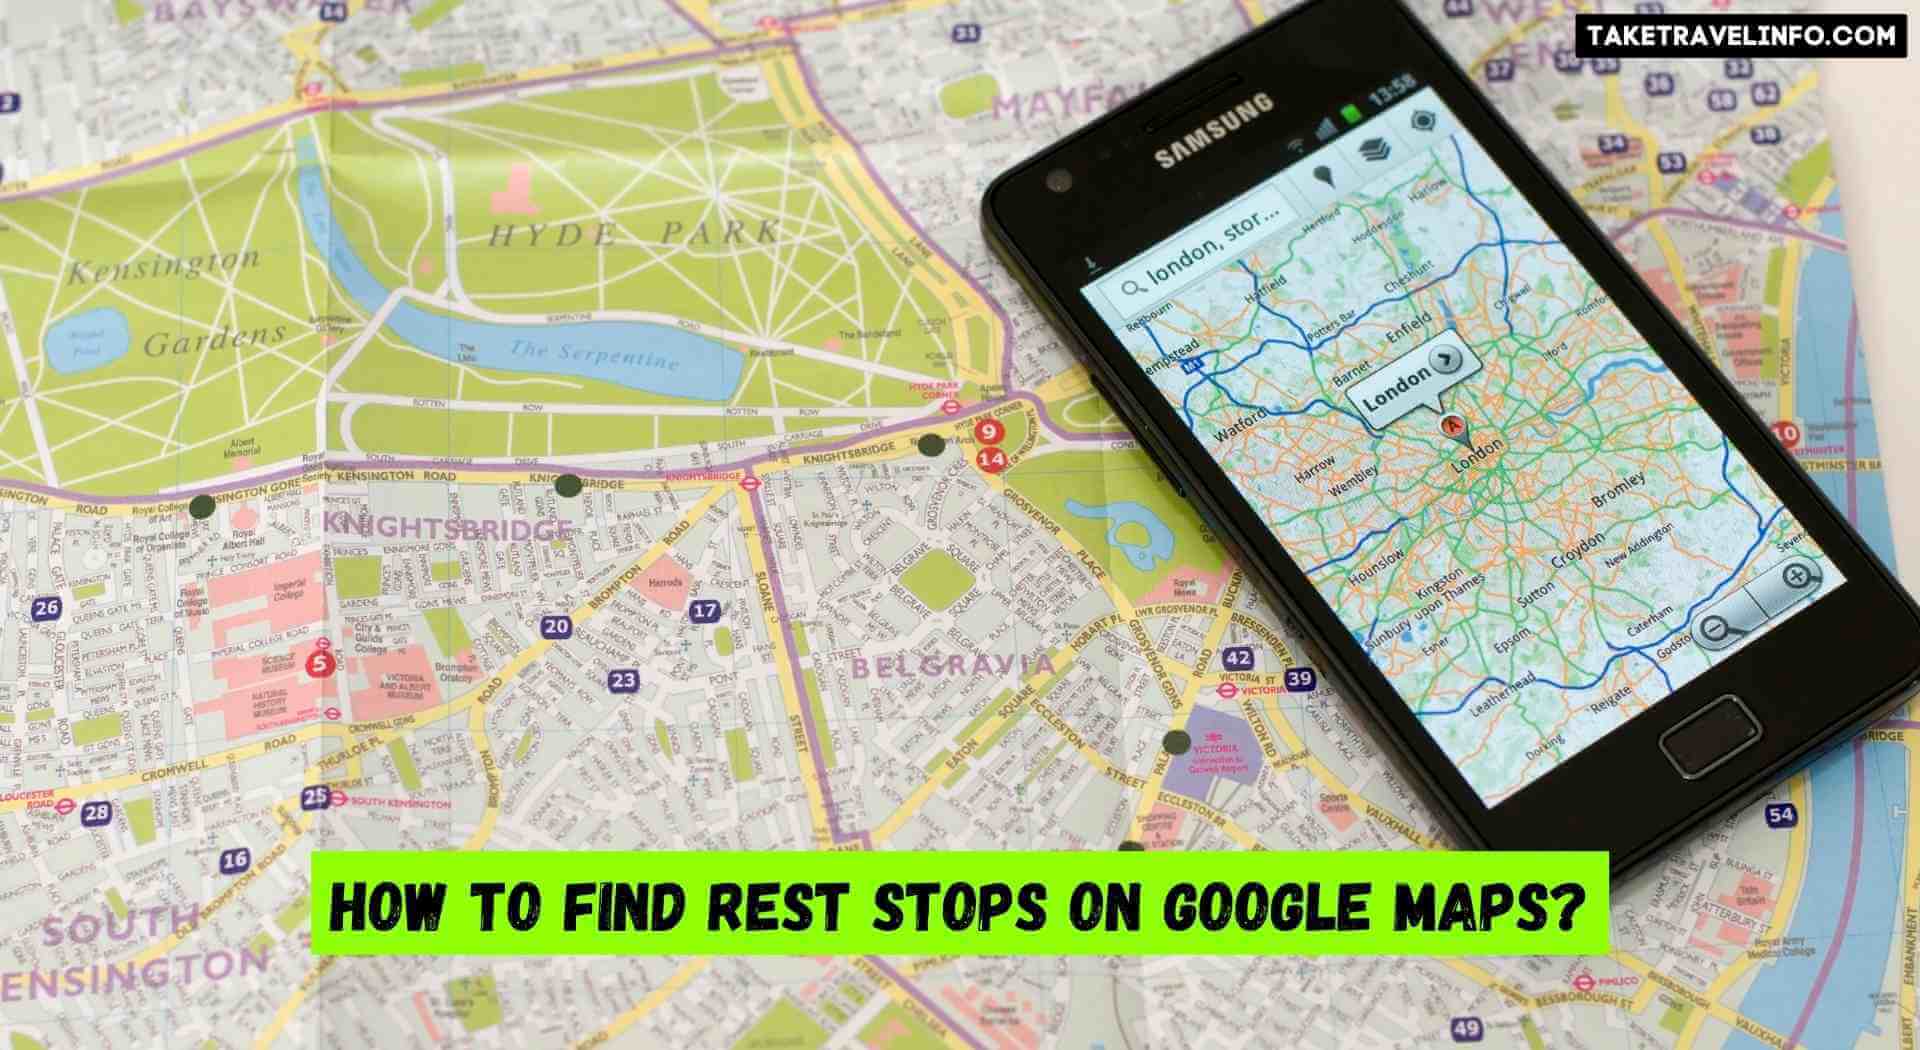 How to Find Rest Stops on Google Maps